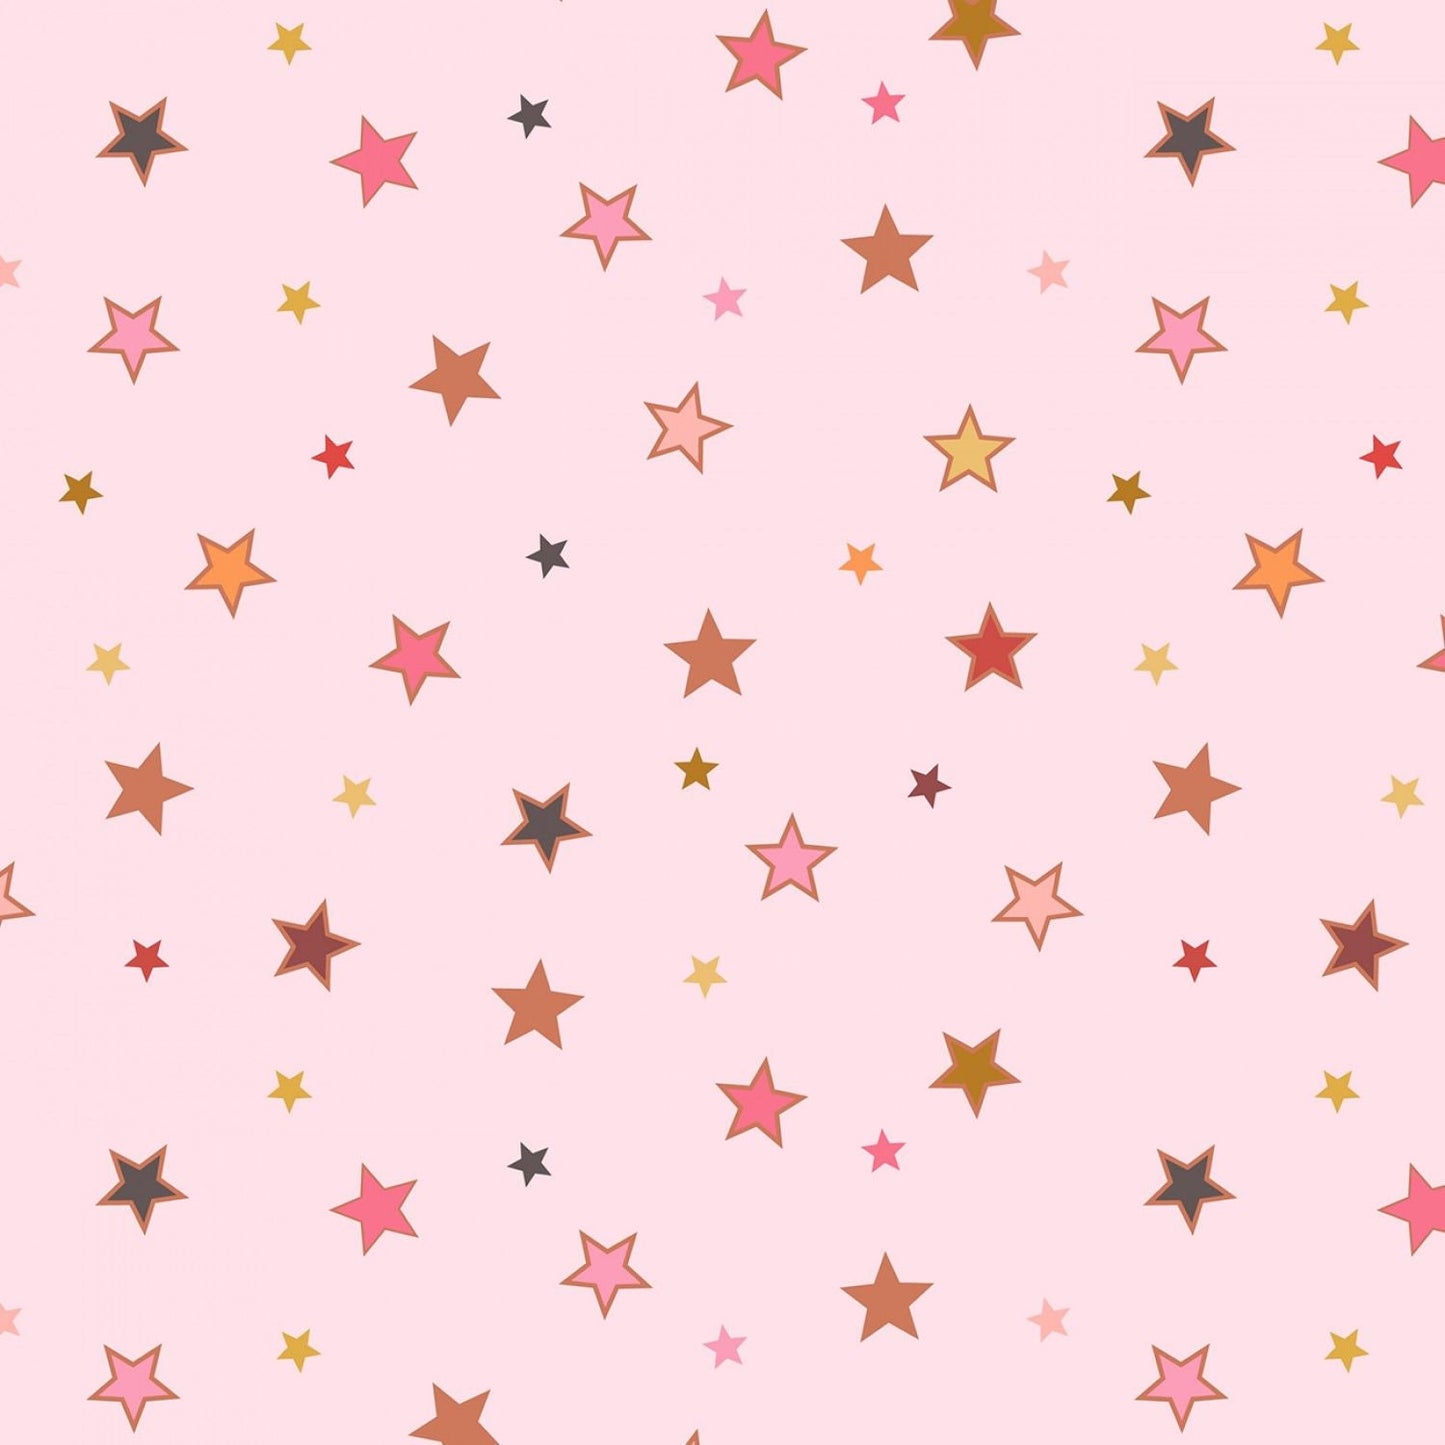 Rainbows Calming Stars with Rose Gold Metallic A442.1 Cotton Woven Fabric